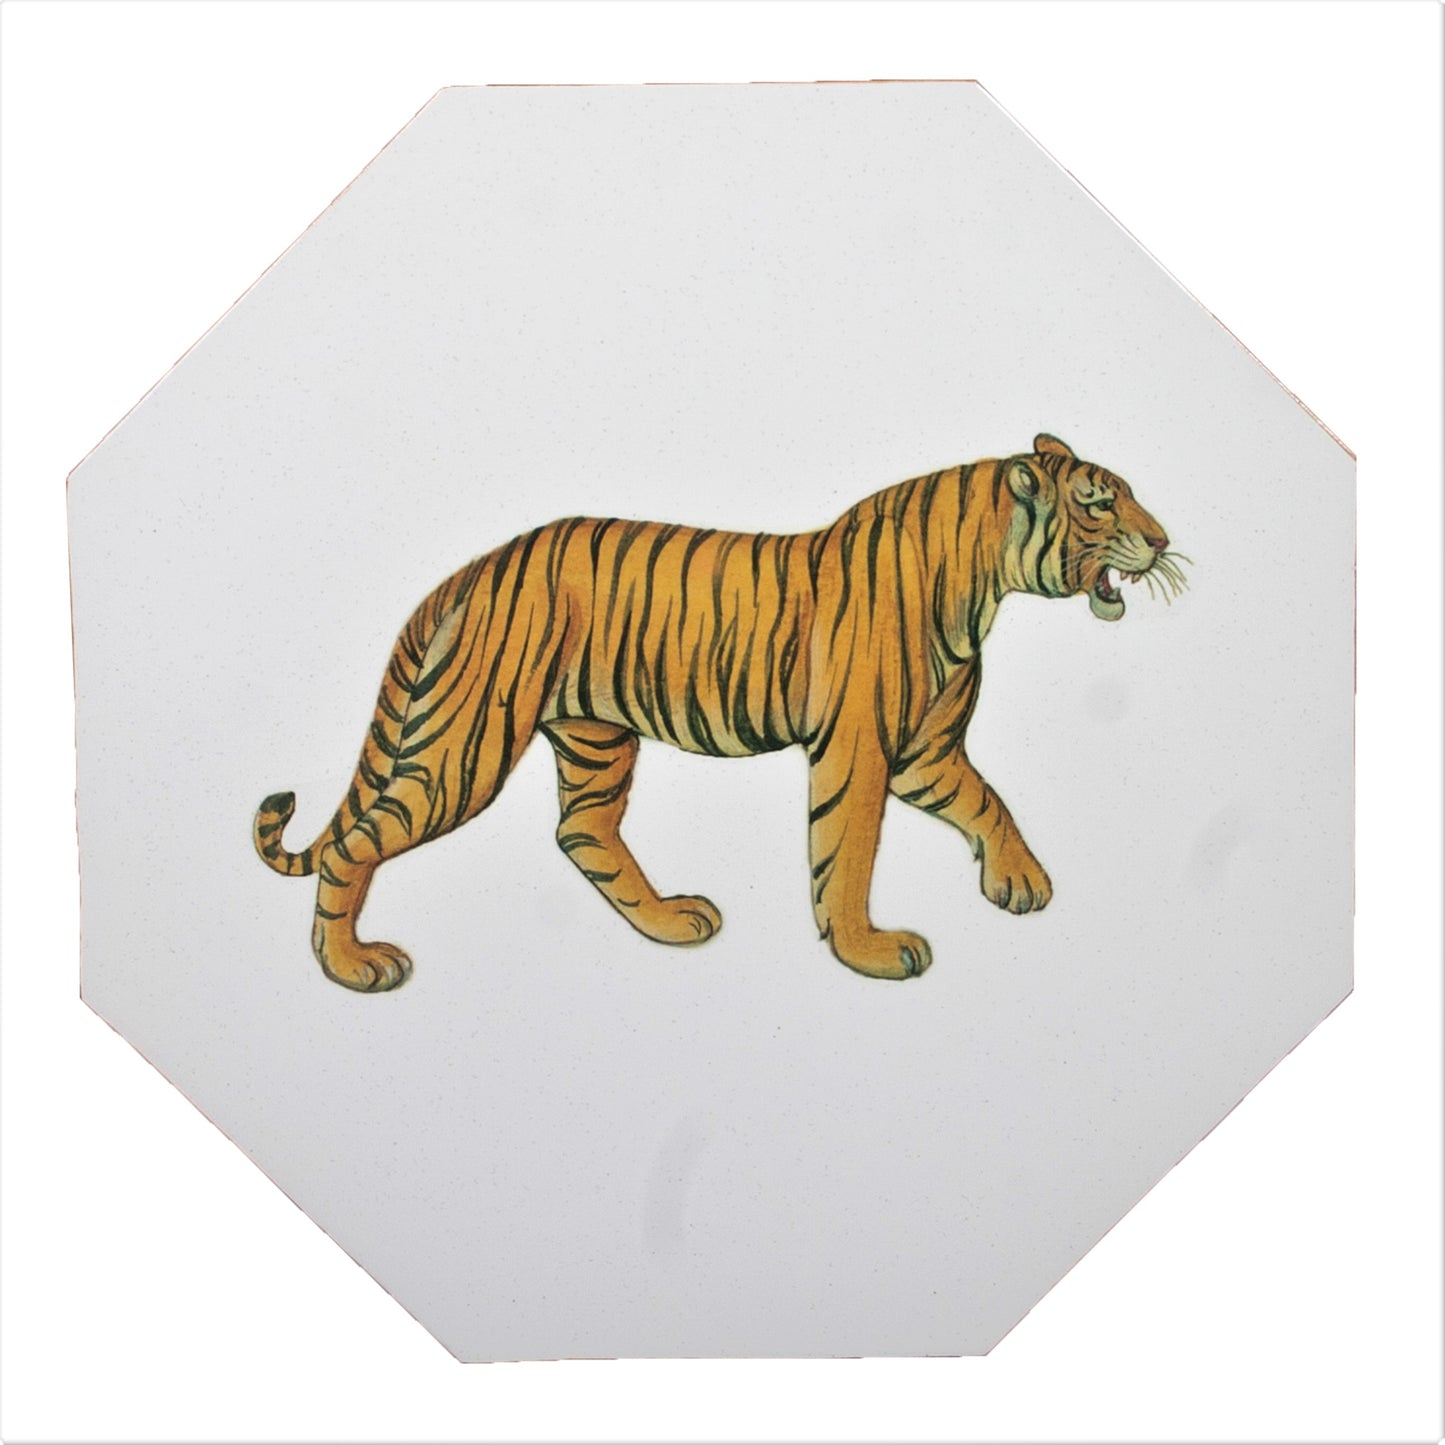 Octagonal Tablemats Set of 4 (boxed): Tiger